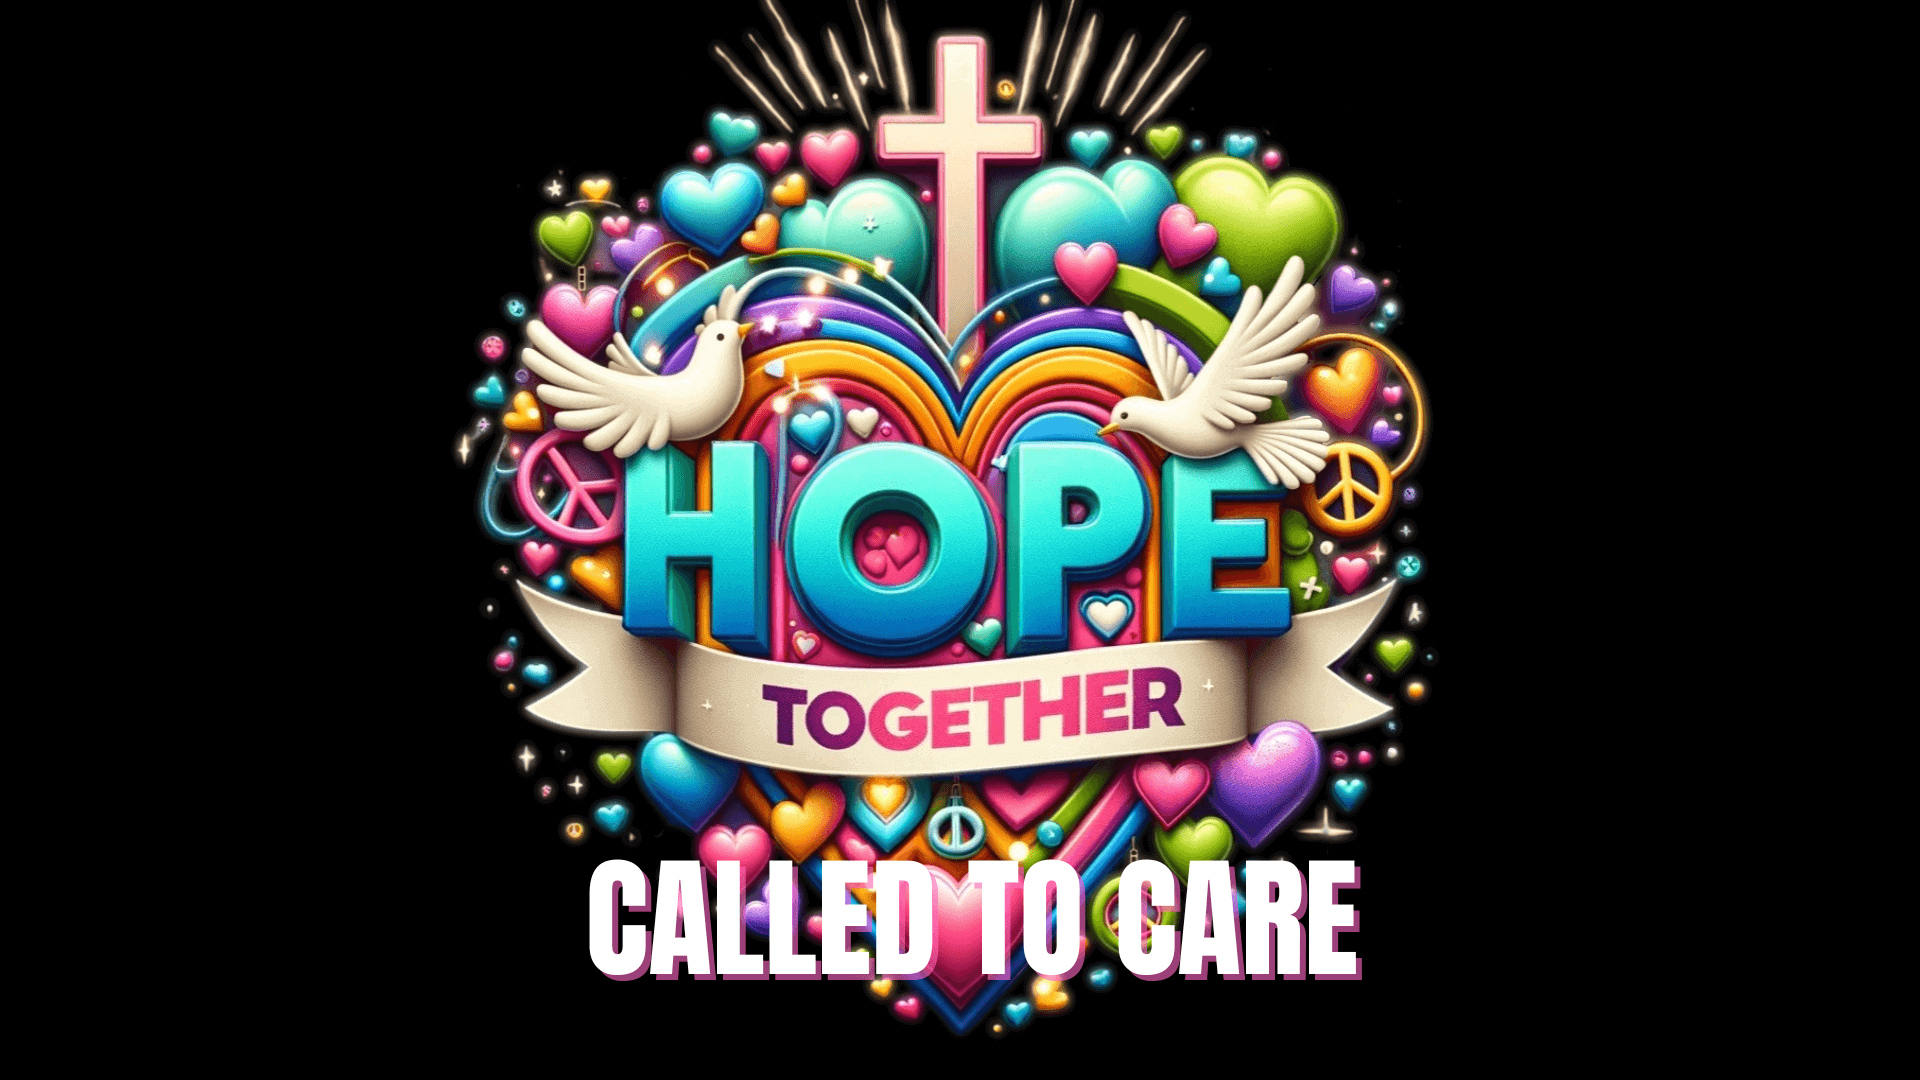 Hope Together - Called to care